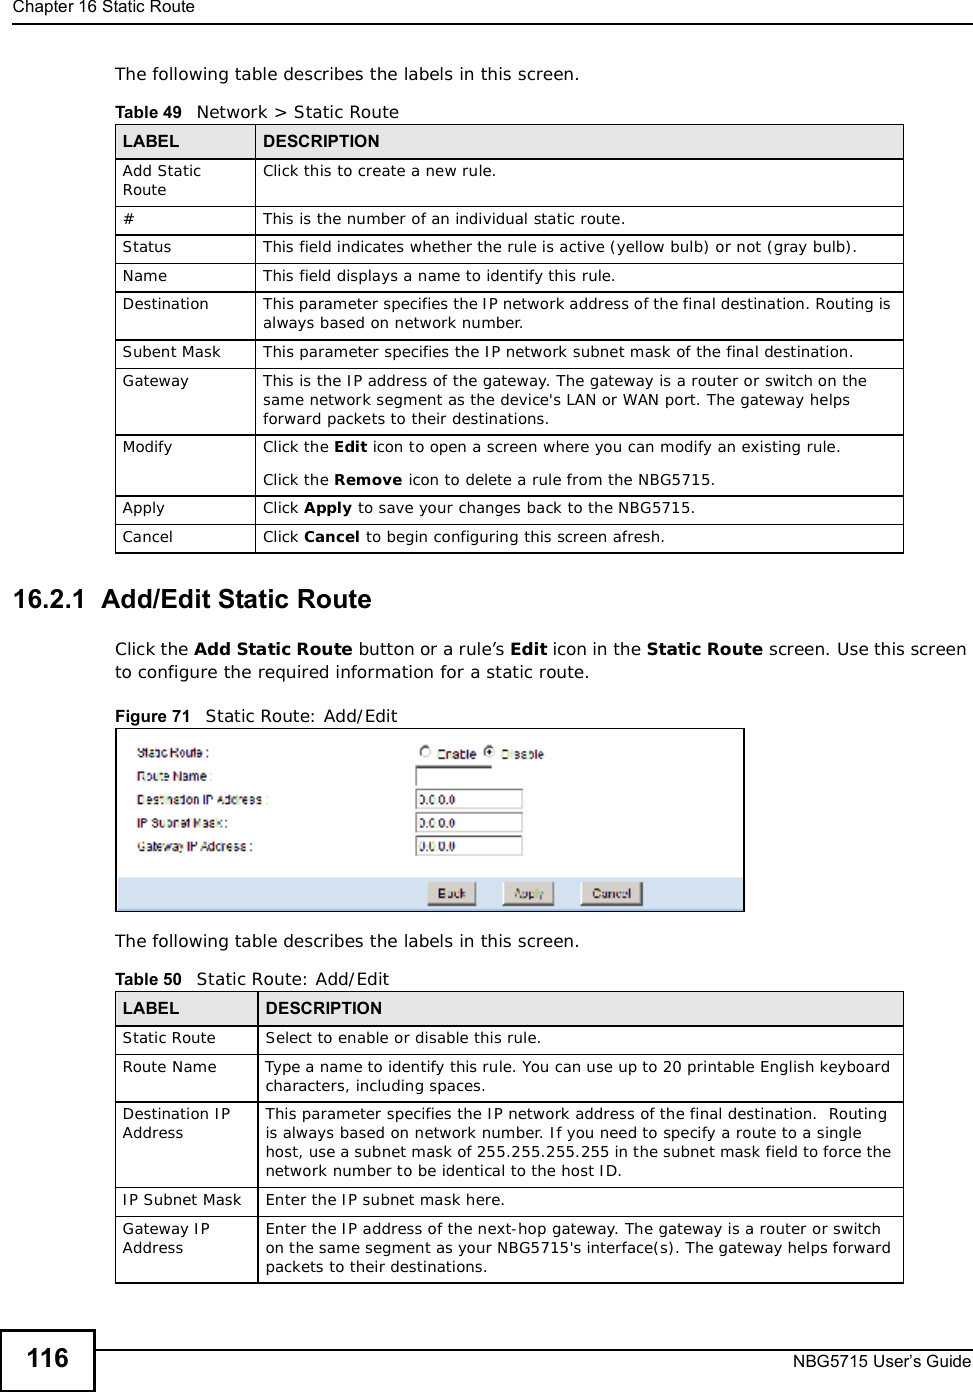 Chapter 16Static RouteNBG5715 User’s Guide116The following table describes the labels in this screen. 16.2.1  Add/Edit Static Route  Click the Add Static Route button or a rule’s Edit icon in the Static Route screen. Use this screen to configure the required information for a static route. Figure 71   Static Route: Add/Edit The following table describes the labels in this screen. Table 49   Network &gt; Static RouteLABEL DESCRIPTIONAdd Static Route Click this to create a new rule.#This is the number of an individual static route.Status This field indicates whether the rule is active (yellow bulb) or not (gray bulb).Name This field displays a name to identify this rule.Destination This parameter specifies the IP network address of the final destination. Routing is always based on network number. Subent Mask This parameter specifies the IP network subnet mask of the final destination.Gateway This is the IP address of the gateway. The gateway is a router or switch on the same network segment as the device&apos;s LAN or WAN port. The gateway helps forward packets to their destinations.Modify Click the Edit icon to open a screen where you can modify an existing rule. Click the Remove icon to delete a rule from the NBG5715.Apply Click Apply to save your changes back to the NBG5715.Cancel Click Cancel to begin configuring this screen afresh.Table 50   Static Route: Add/EditLABEL DESCRIPTIONStatic Route Select to enable or disable this rule.Route NameType a name to identify this rule. You can use up to 20 printable English keyboard characters, including spaces.Destination IP Address This parameter specifies the IP network address of the final destination.  Routing is always based on network number. If you need to specify a route to a single host, use a subnet mask of 255.255.255.255 in the subnet mask field to force the network number to be identical to the host ID.IP Subnet Mask  Enter the IP subnet mask here.Gateway IP Address Enter the IP address of the next-hop gateway. The gateway is a router or switch on the same segment as your NBG5715&apos;s interface(s). The gateway helps forward packets to their destinations.